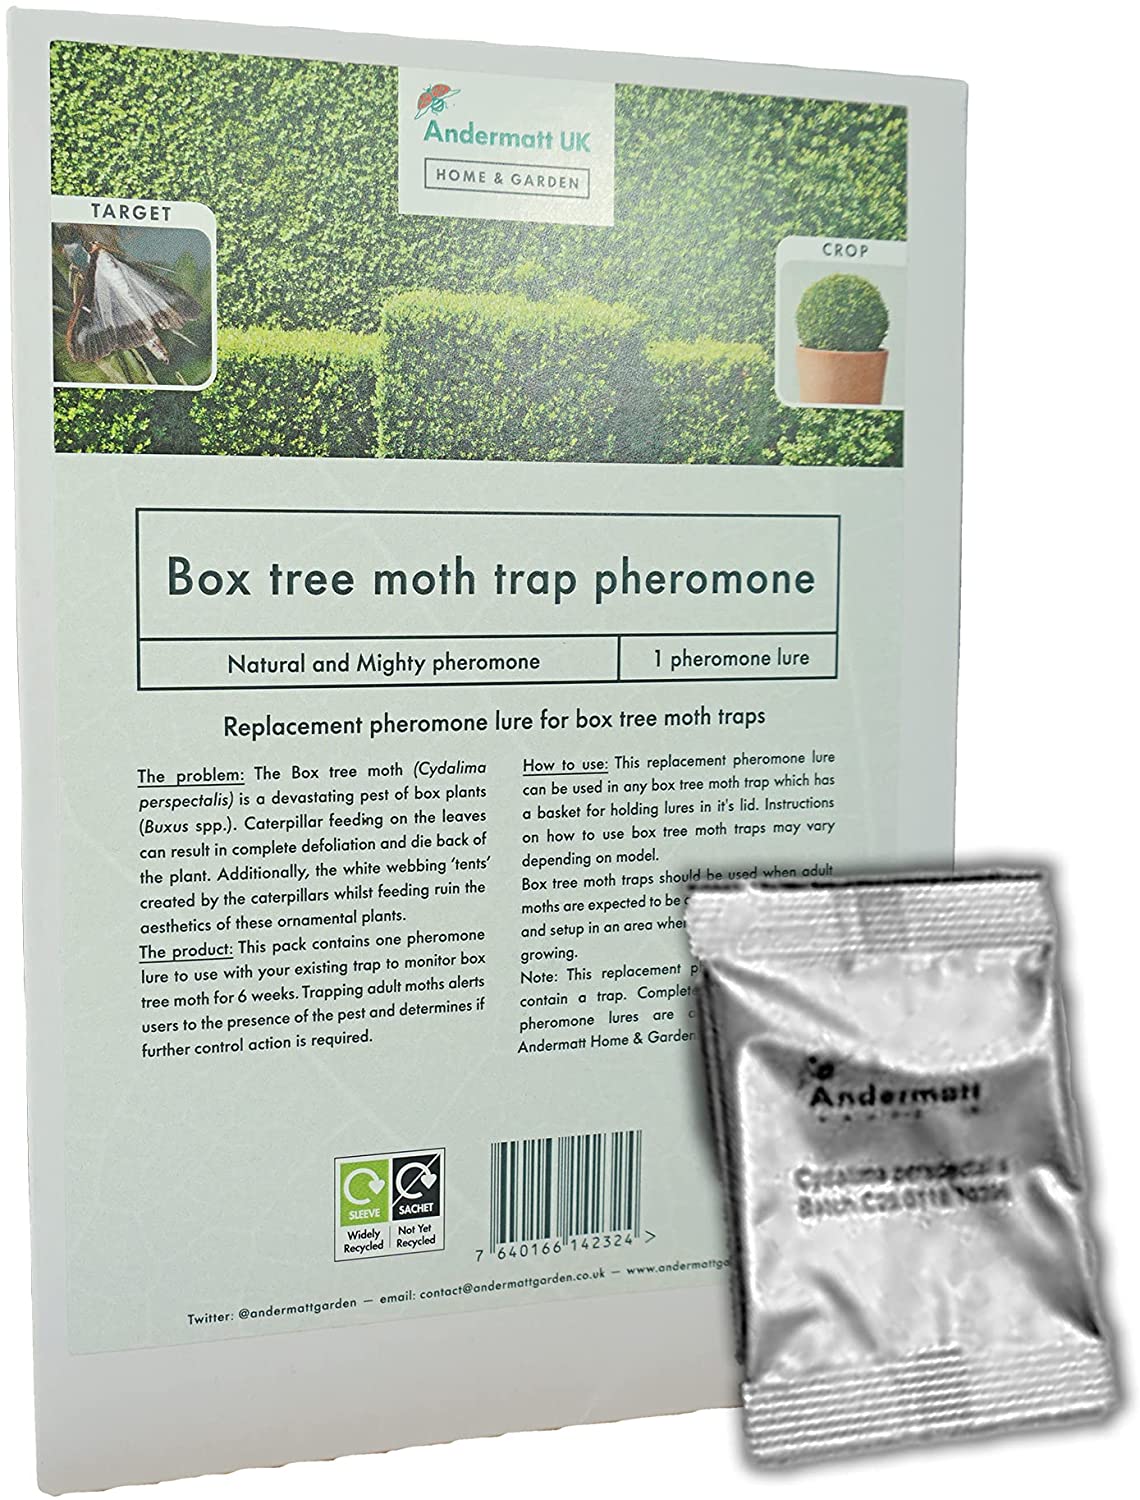 Photo of the box tree moth pheromone product covers and packages.